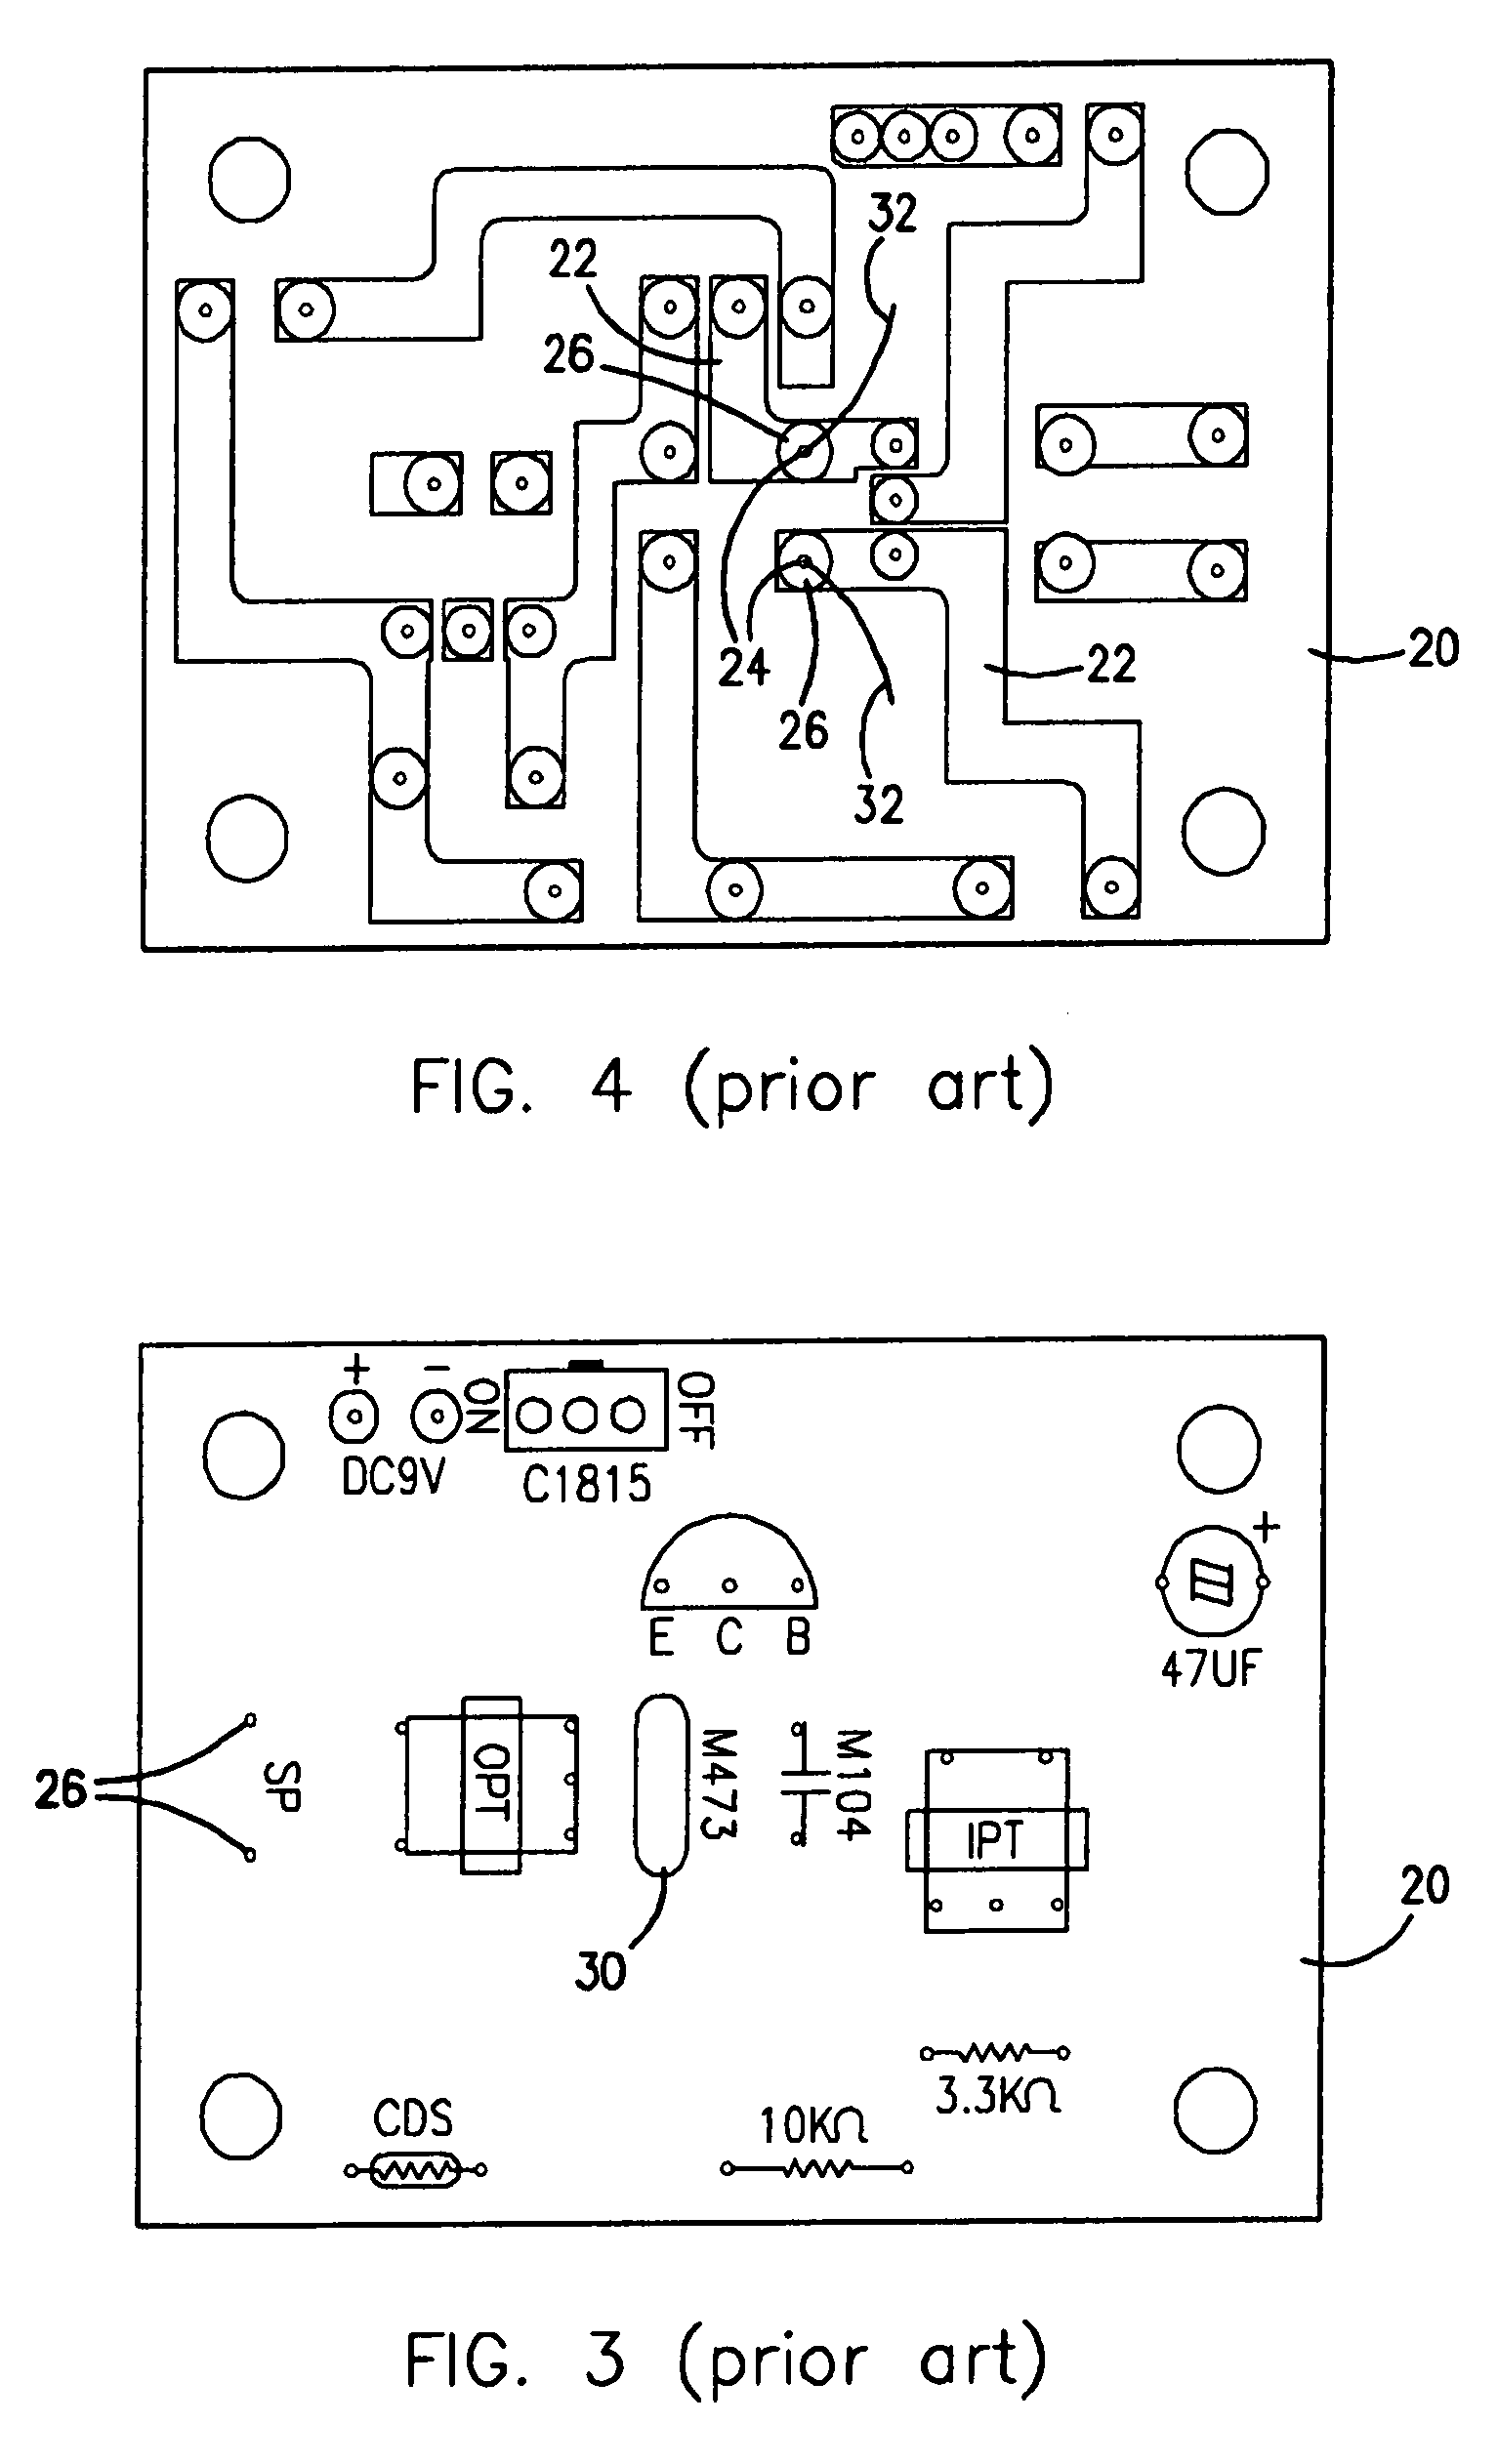 Magnetic component connector, circuit boards for use therewith, and kits for building and designing circuits